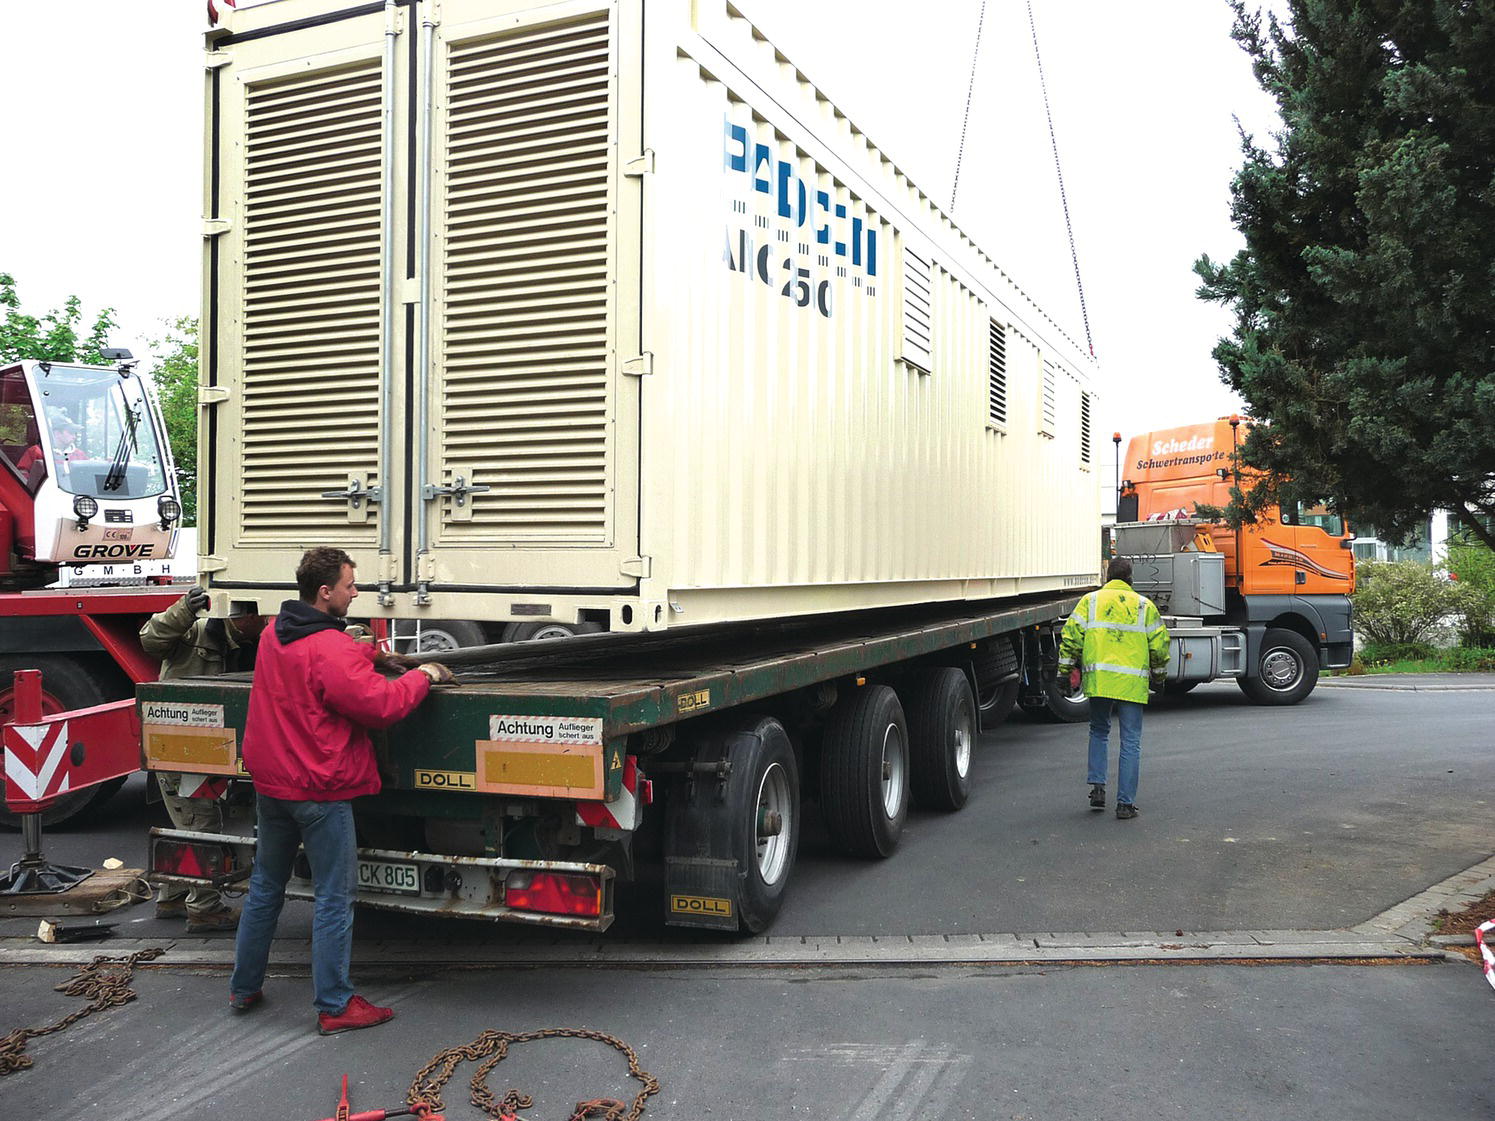 2 Men assisting a 1.6 MWp inverter on a truck.